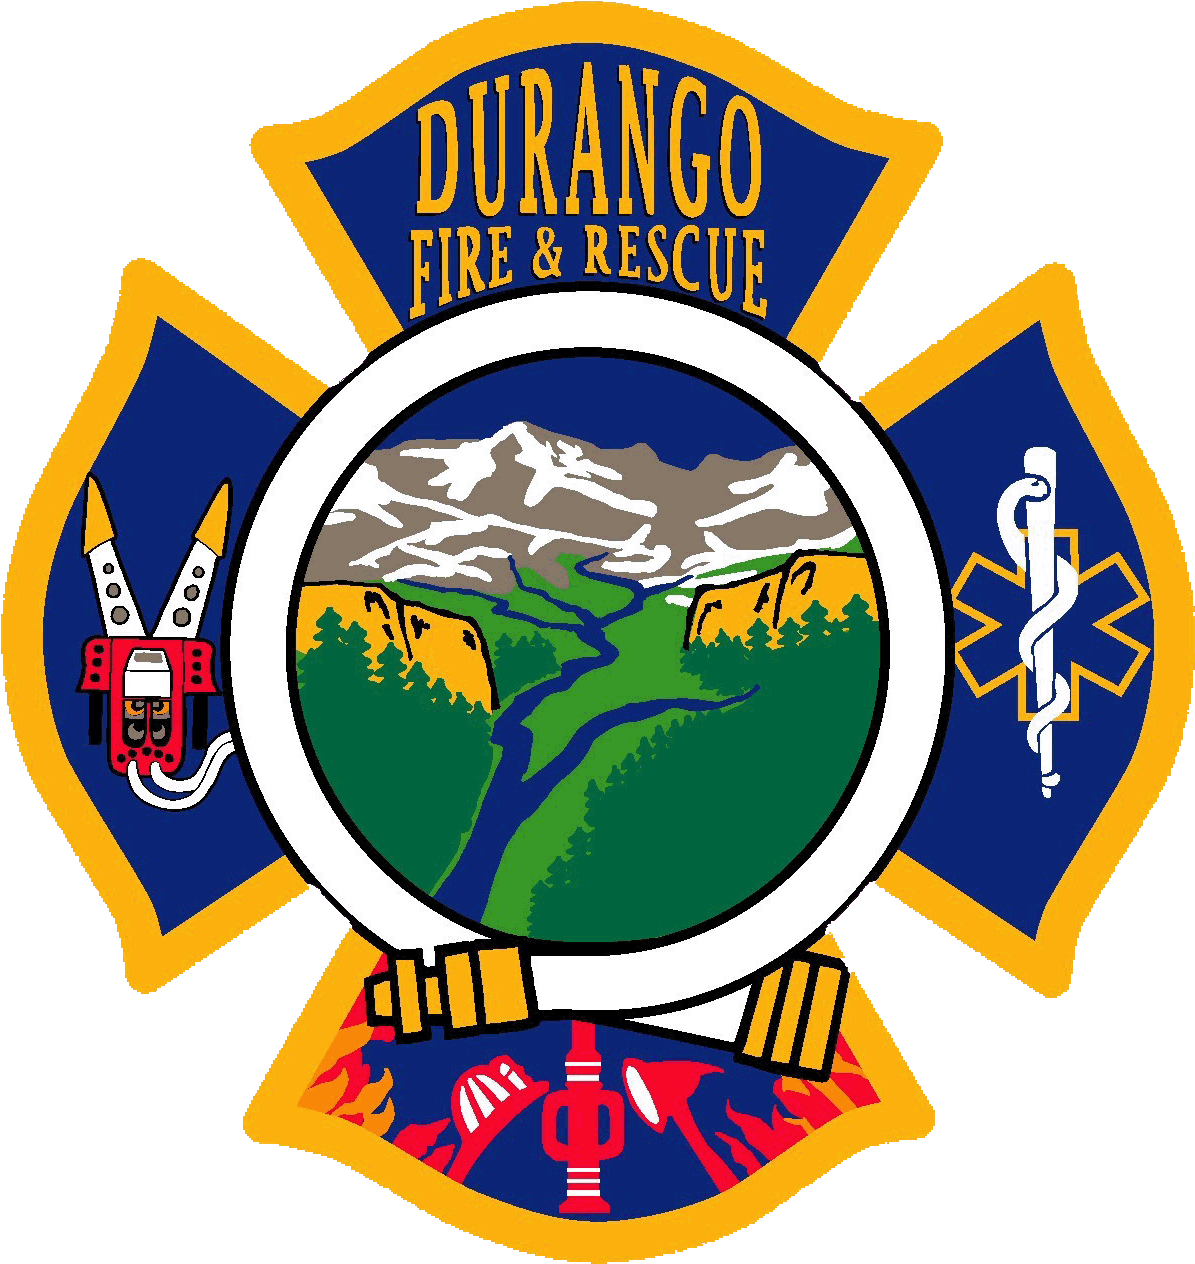 Top Images For Durango Fire Protection On Picsunday - Durango Fire And Rescue (1225x1285)